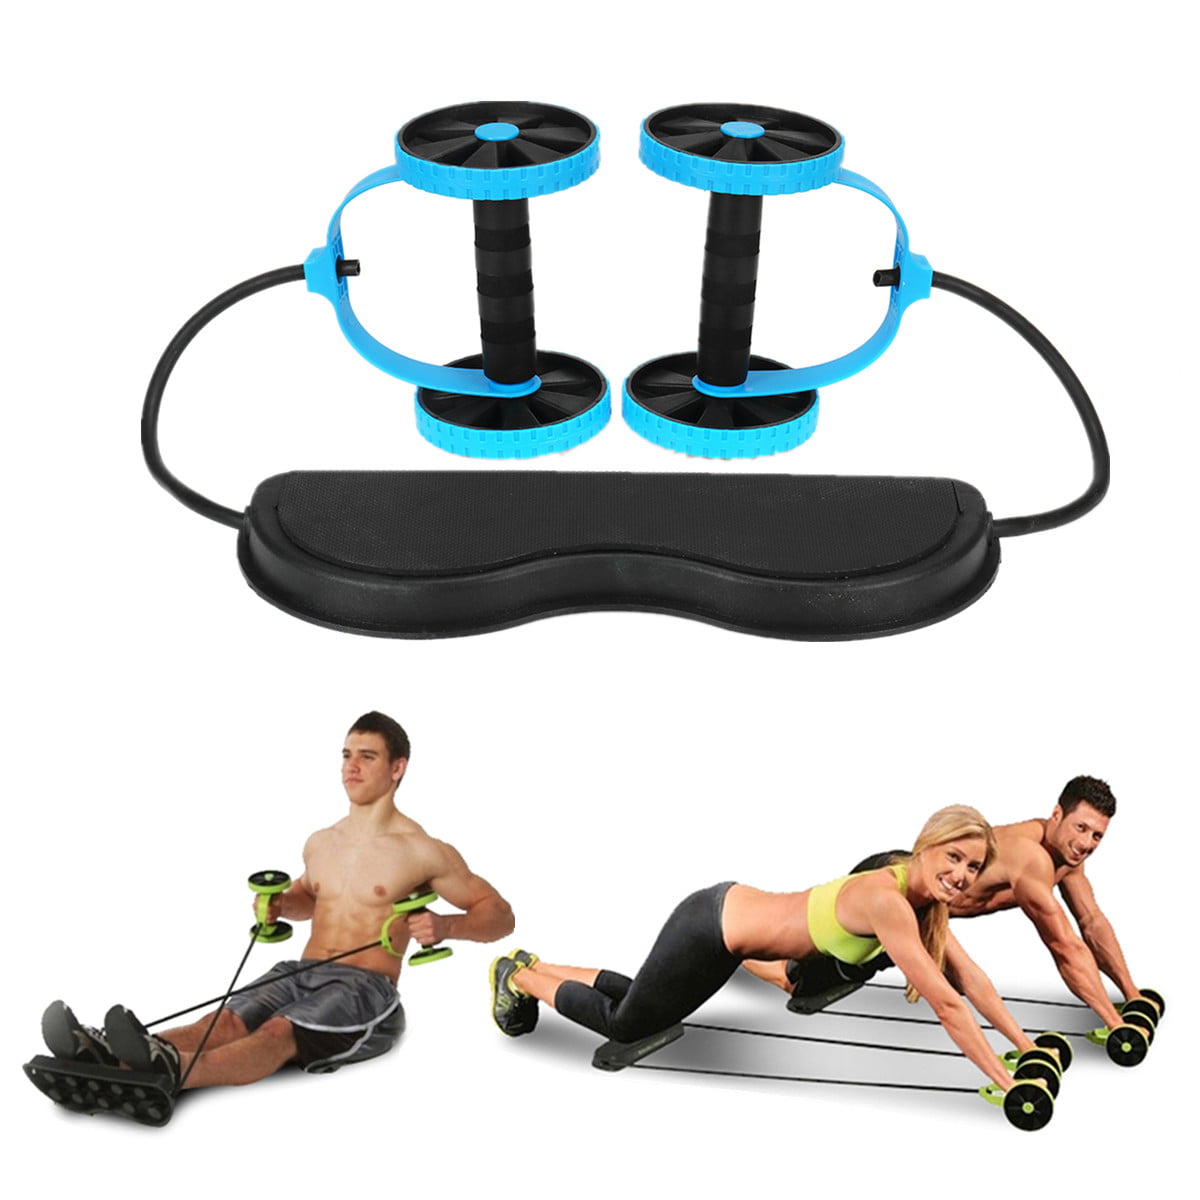 Details about   Nour87 Abdominal Ab Roller Wheel Workout Gym Exercise Muscle and Fitness Machin 